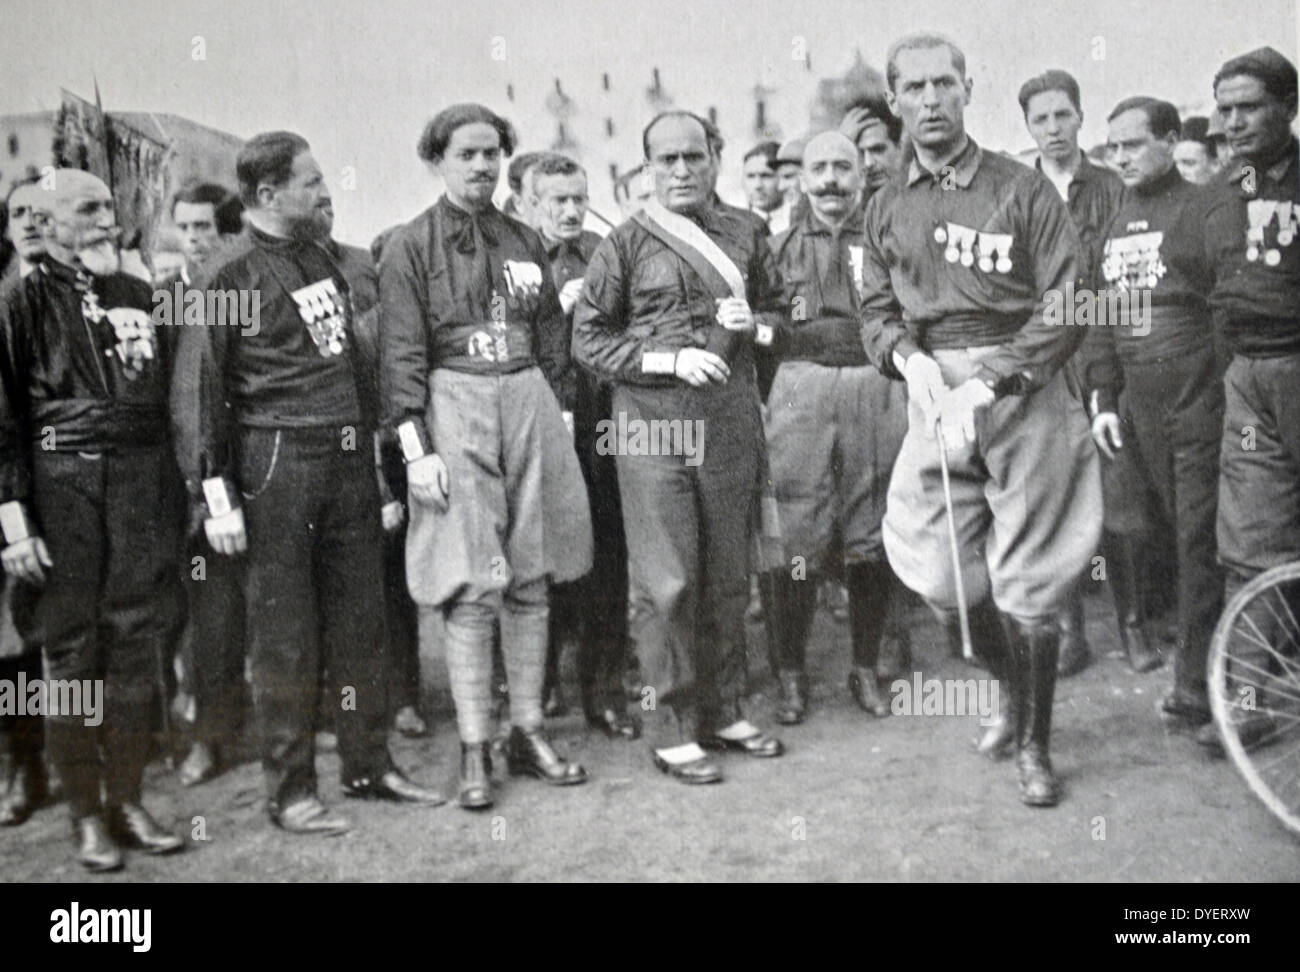 Naples (Oct 1922) - Mussolini, and Quadrumviri and other leaders of the fascist movement pass in review the fascist forces agreed to Naples Stock Photo